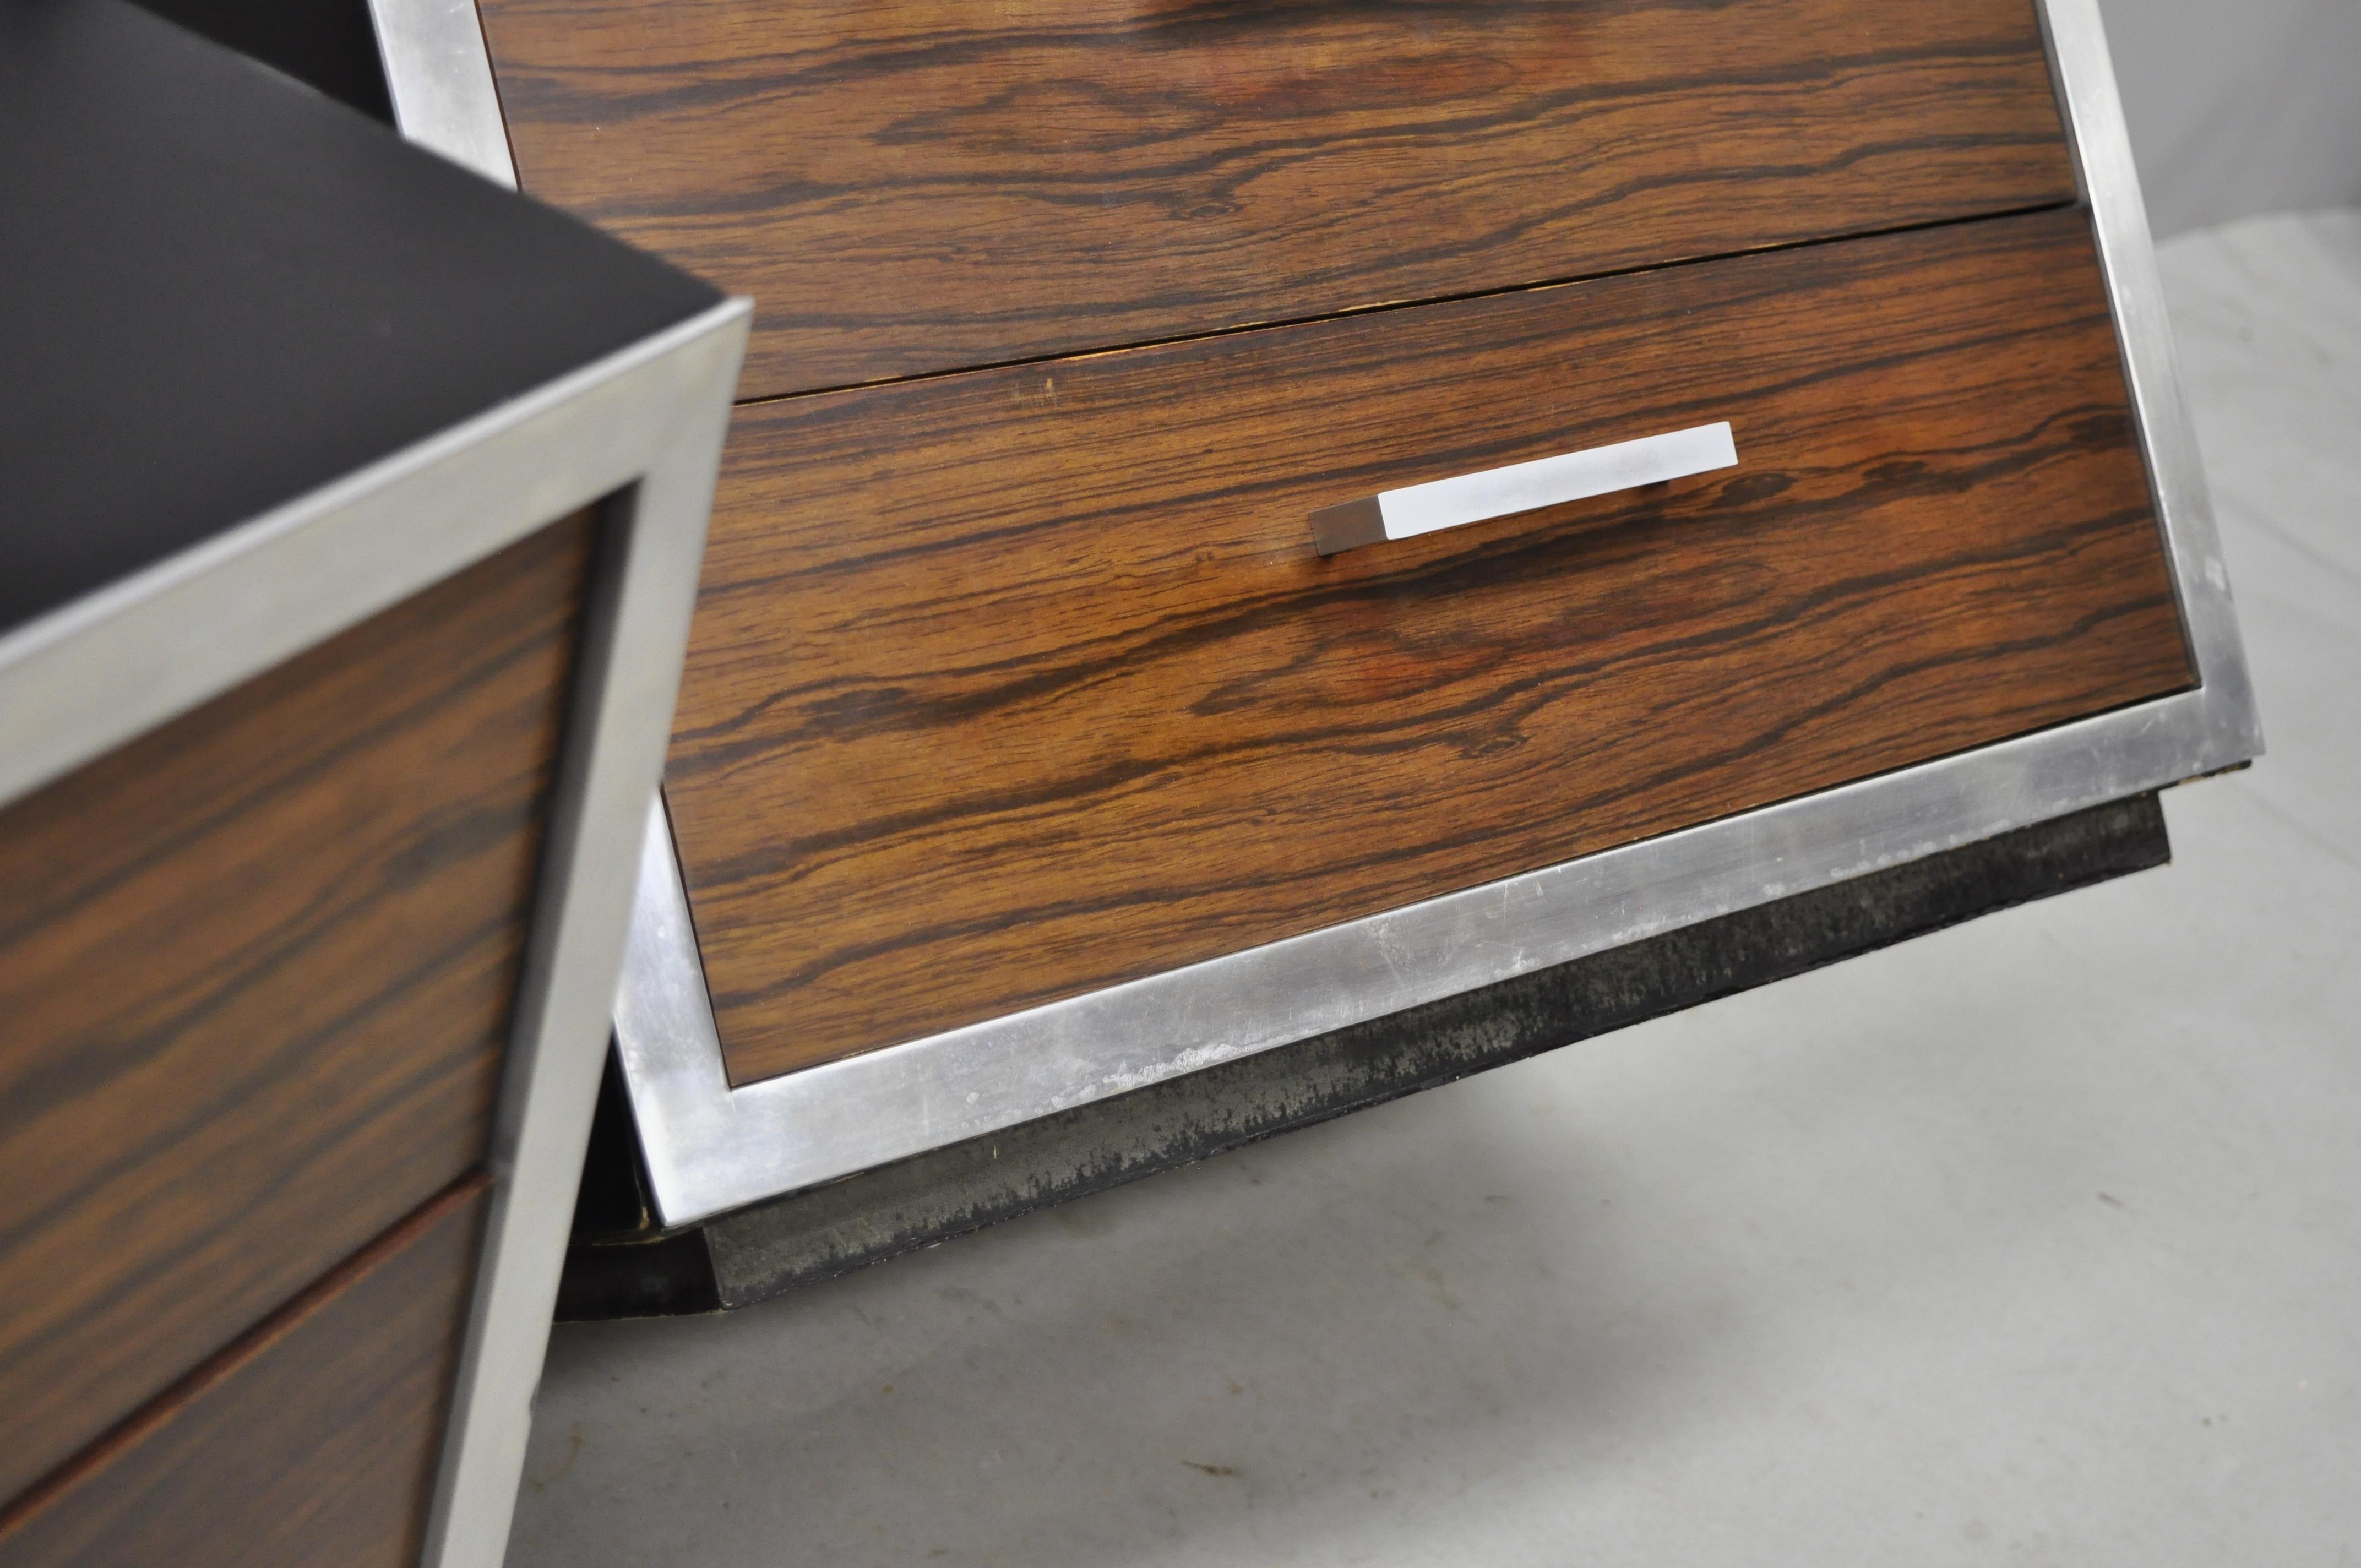 Late 20th Century Mid-Century Modern Rosewood Chrome 3-Drawer Nightstands Pair after Milo Baughman